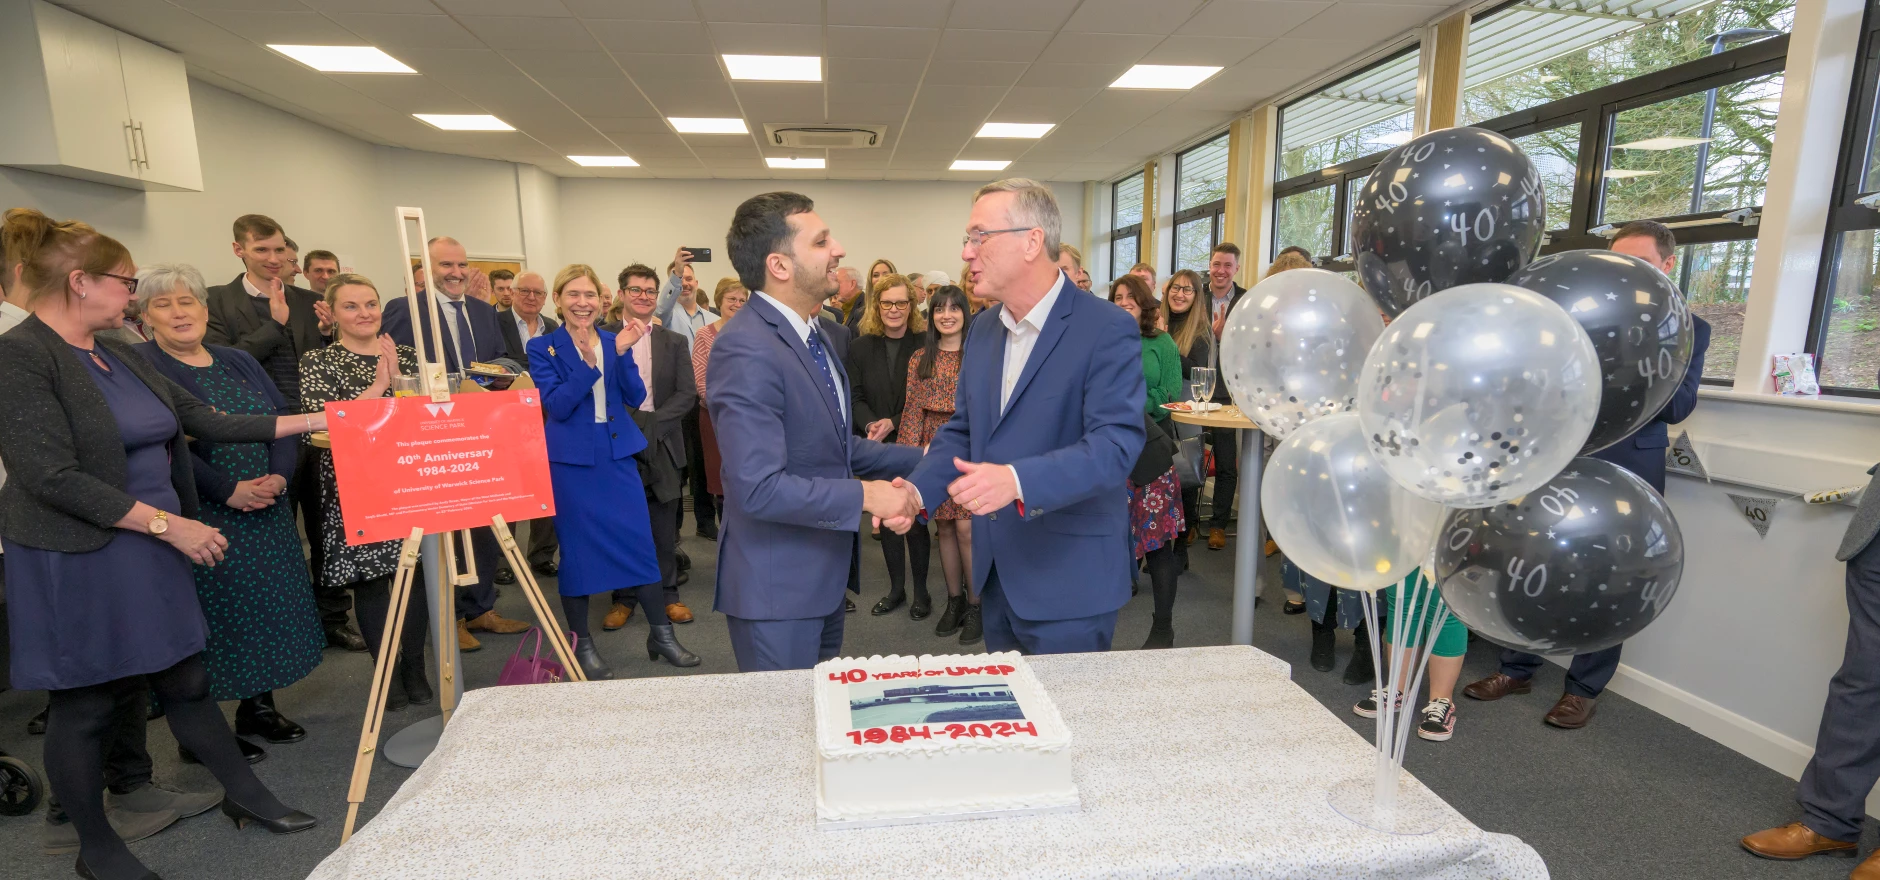 Saqib Bhatti MP, Minister for Tech and the Digital Economy (left), shaking hands with Stuart Croft, Vice Chancellor of the University of Warwick, after a ceremonial cutting of cake to mark the University of Warwick Science Park’s 40th anniversary